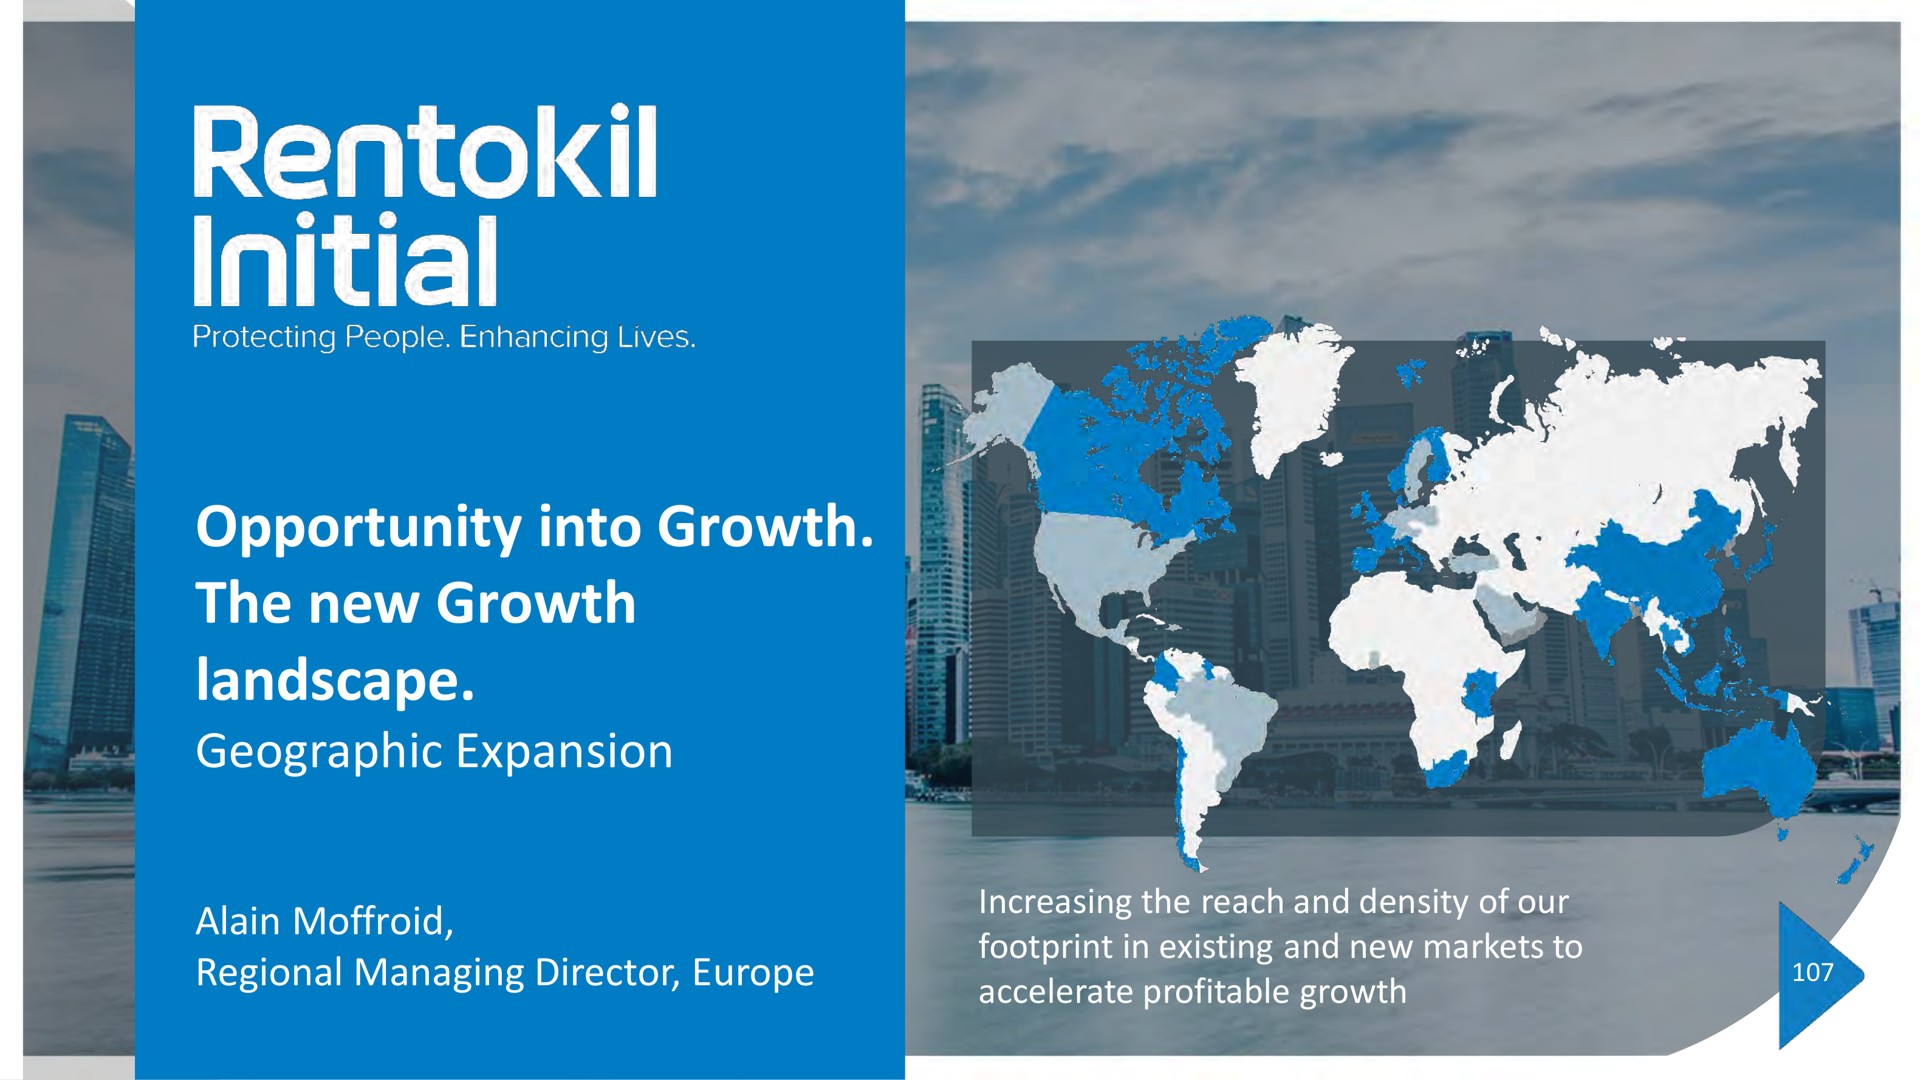 opportunity into growth the new growth landscape geographic expansion regional managing director increasing the reach and density of our footprint in existing and new markets to accelerate profitable growth initial | Rentokil Initial